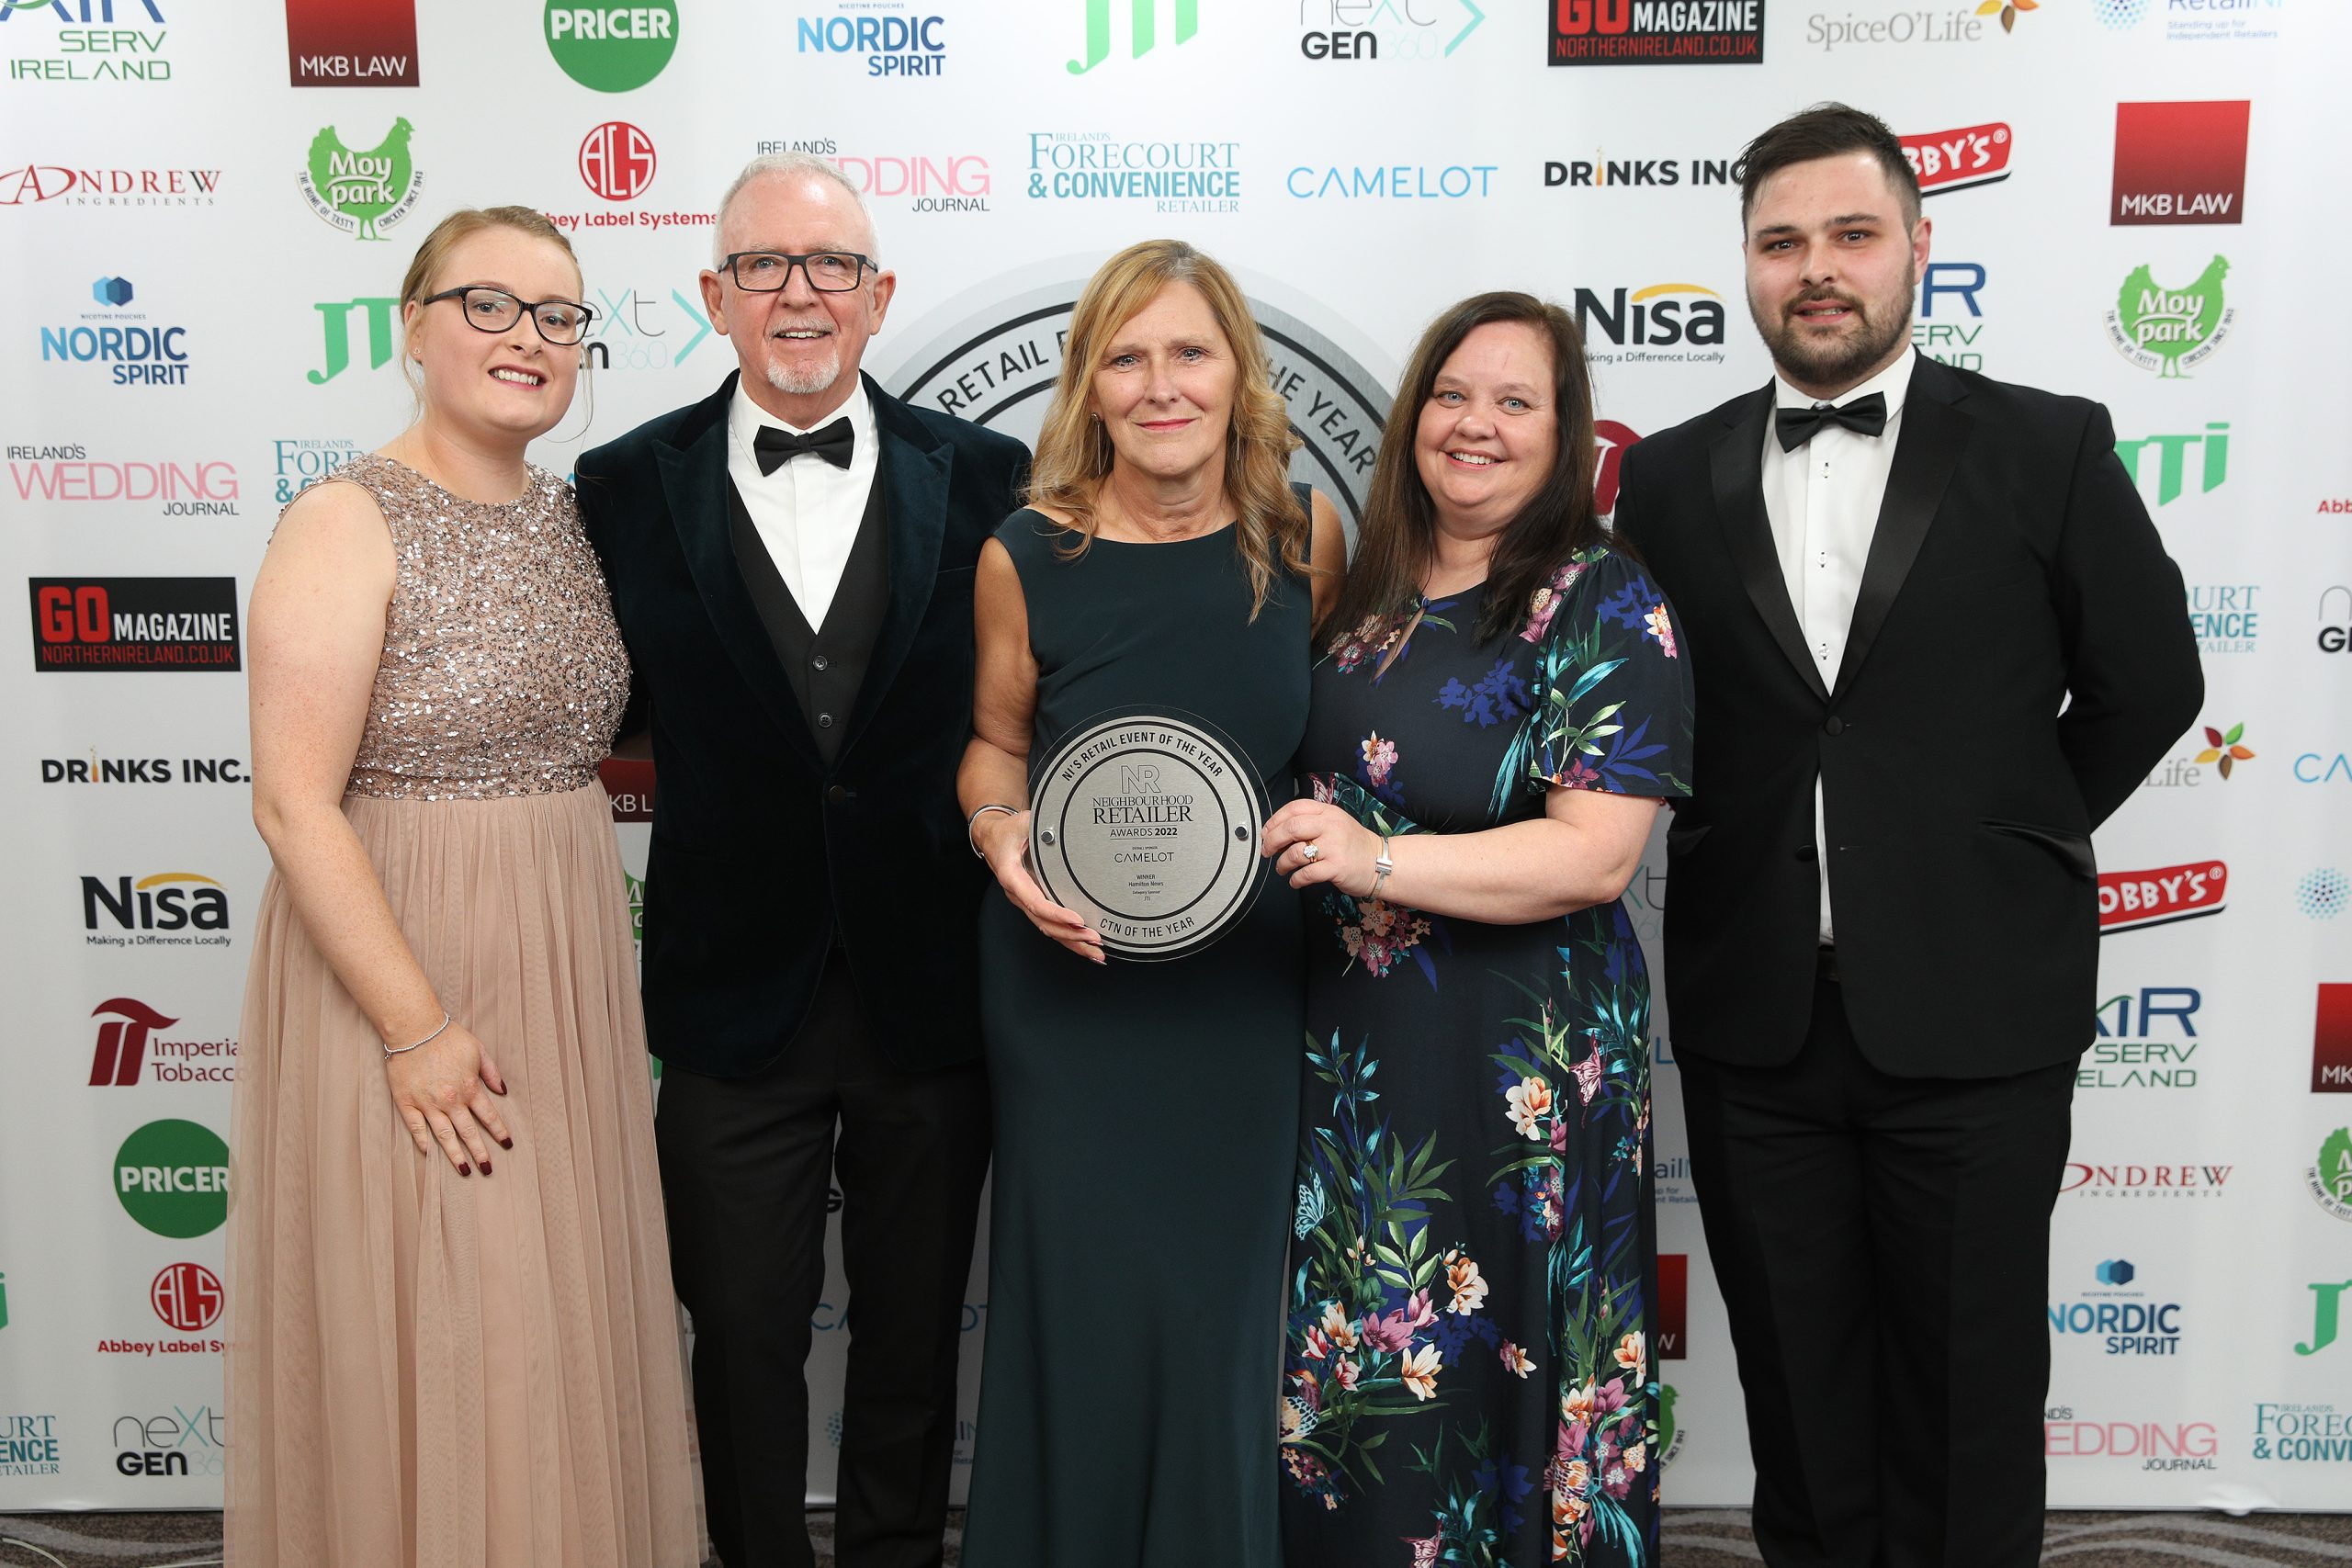 Catering for clientele secured award win for NI’s CTN of the Year